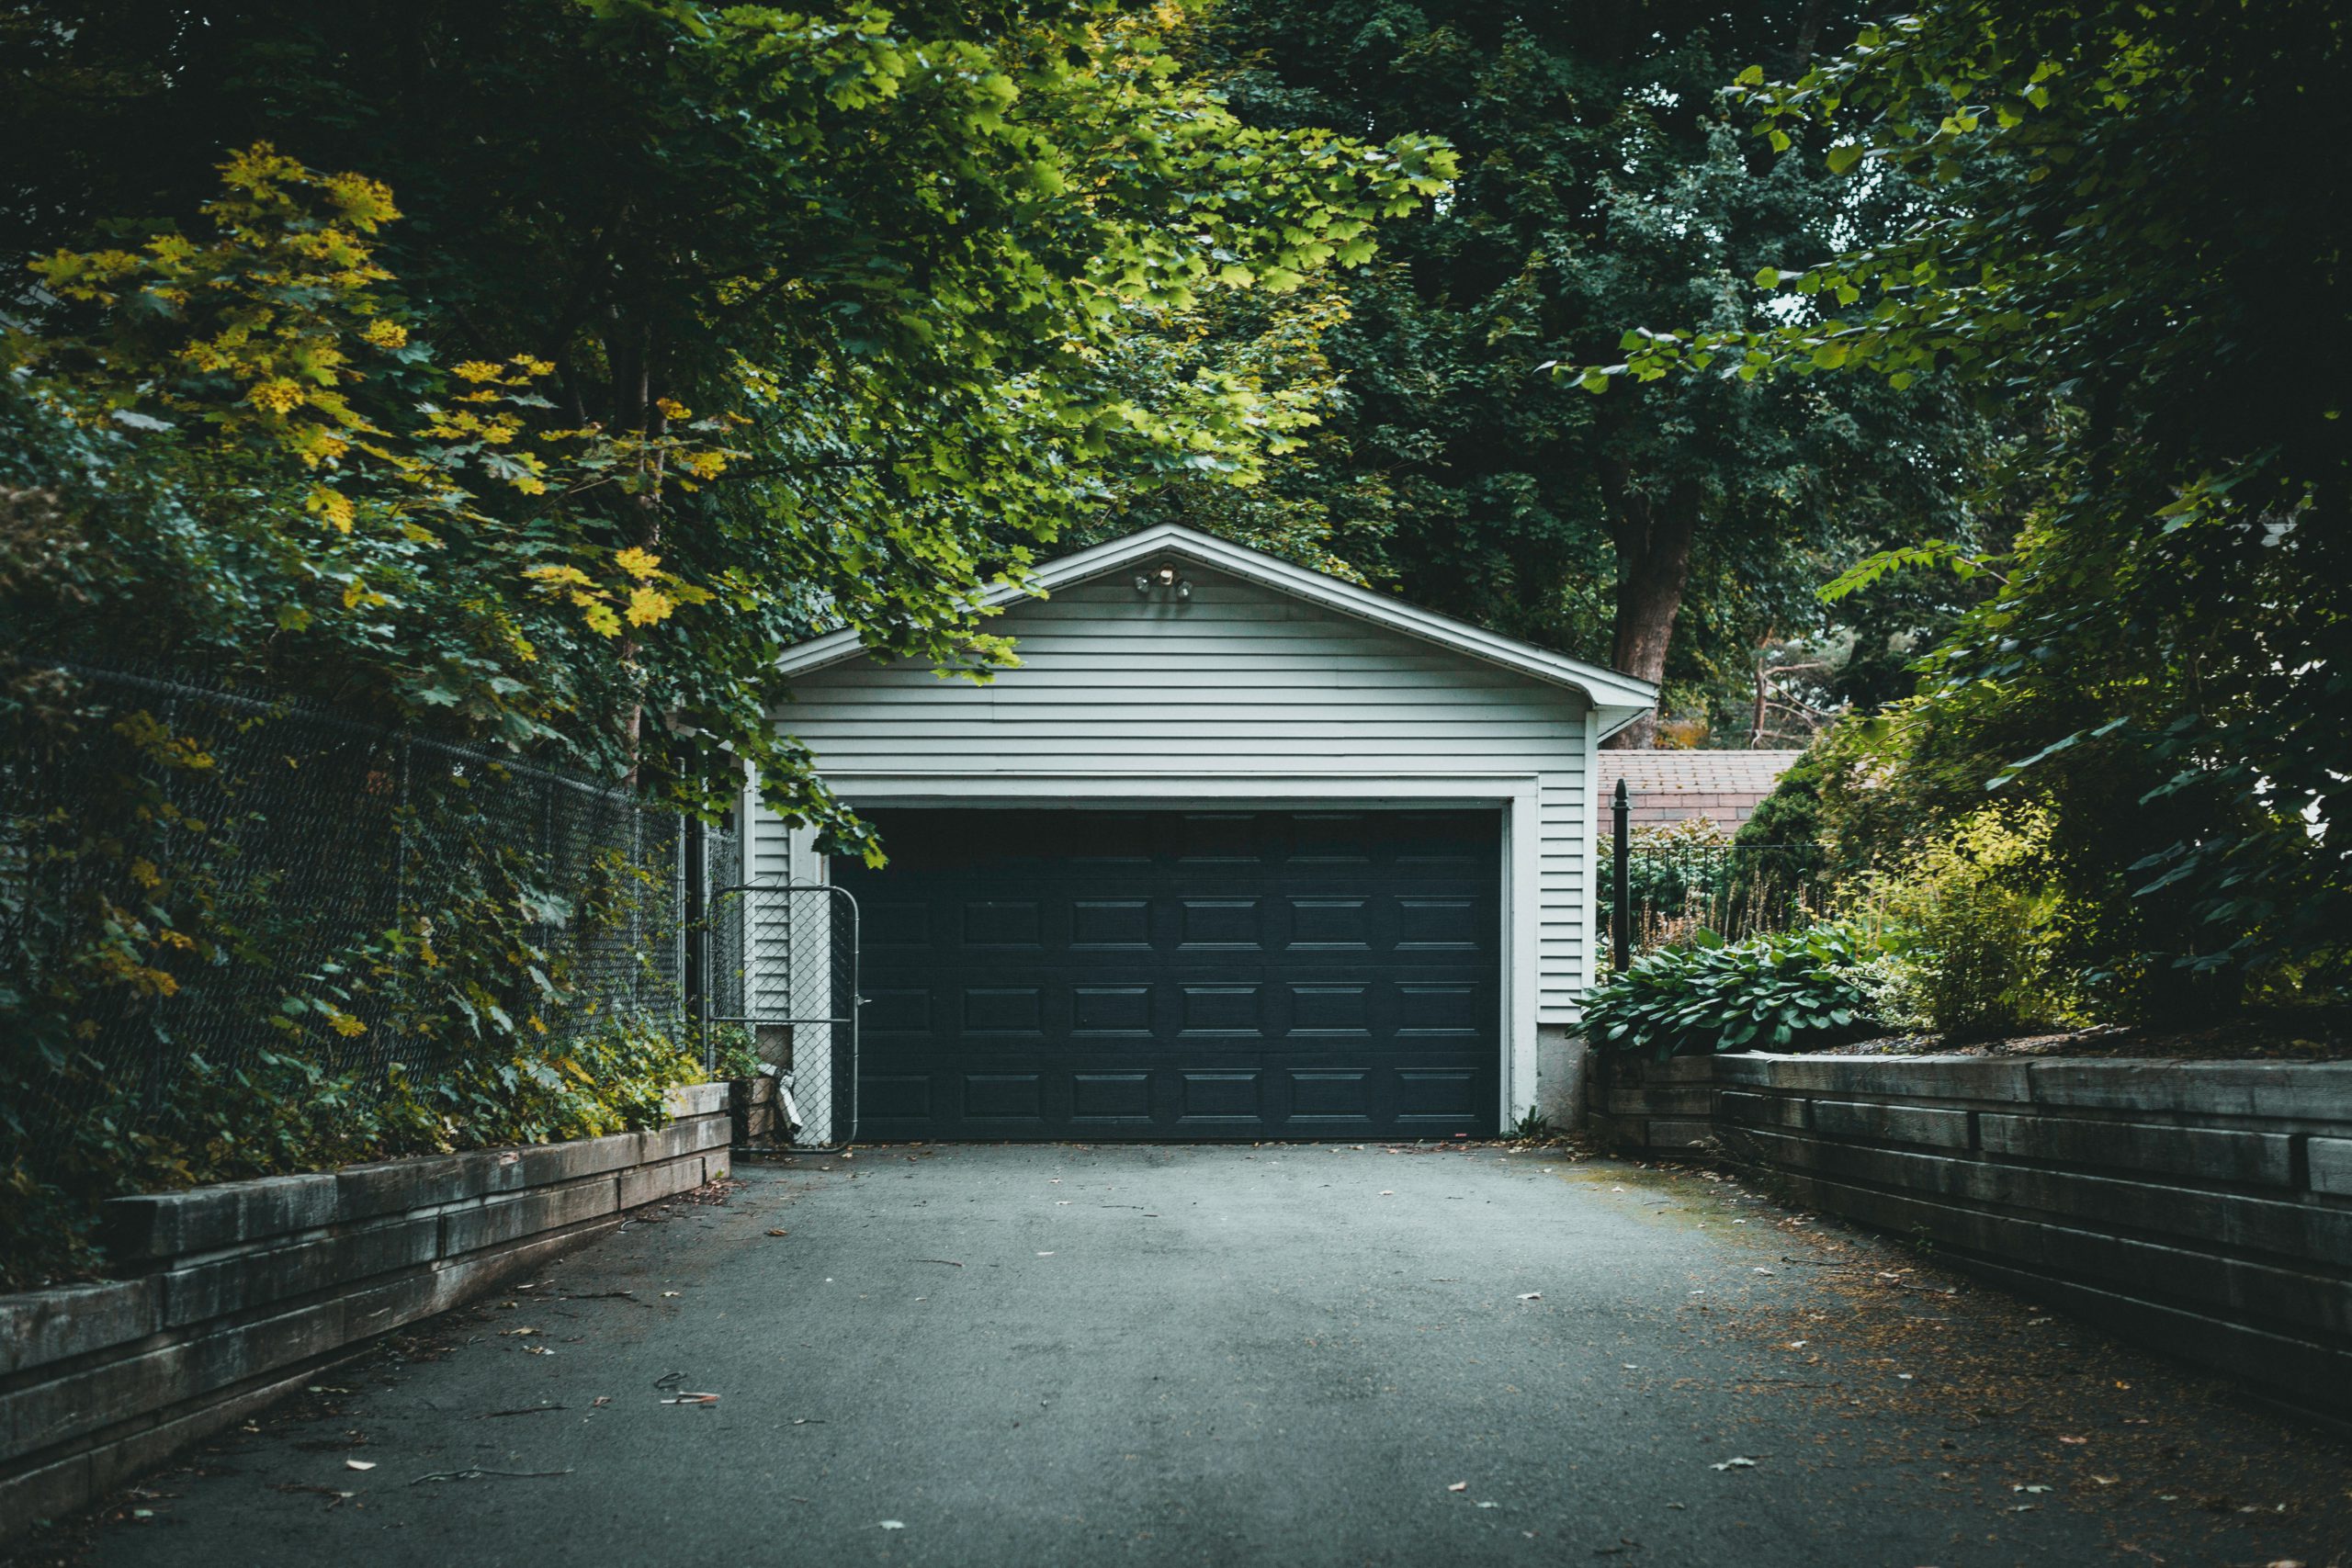 Outdoor garage at the end of a driveway with many trees